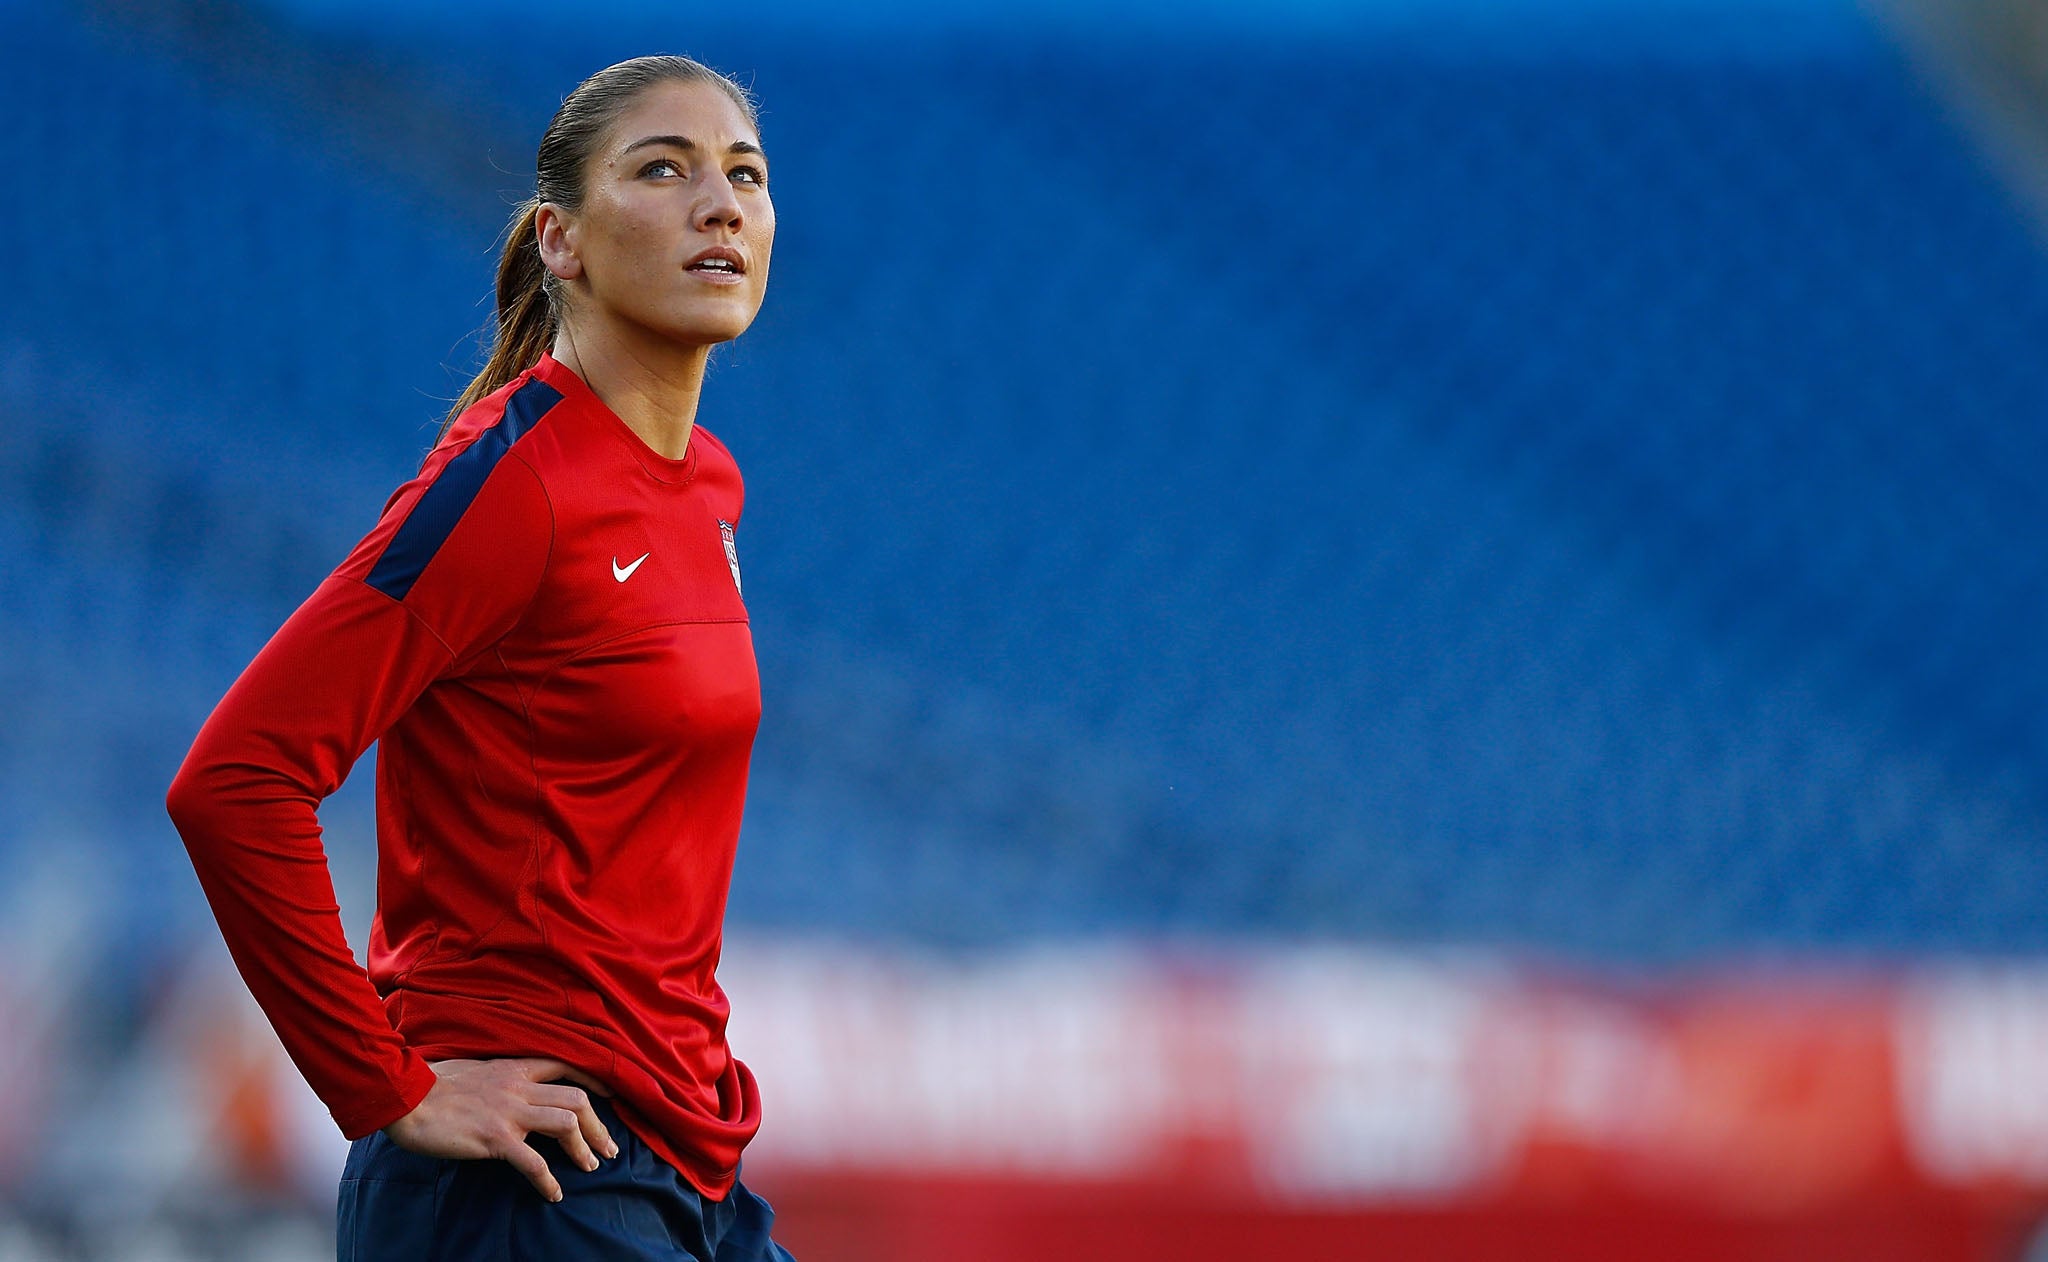 Hope Solo, US soccer player who was among those recently targeted by 4Chan photo hackers, is currently awaiting trial on domestic abuse charges